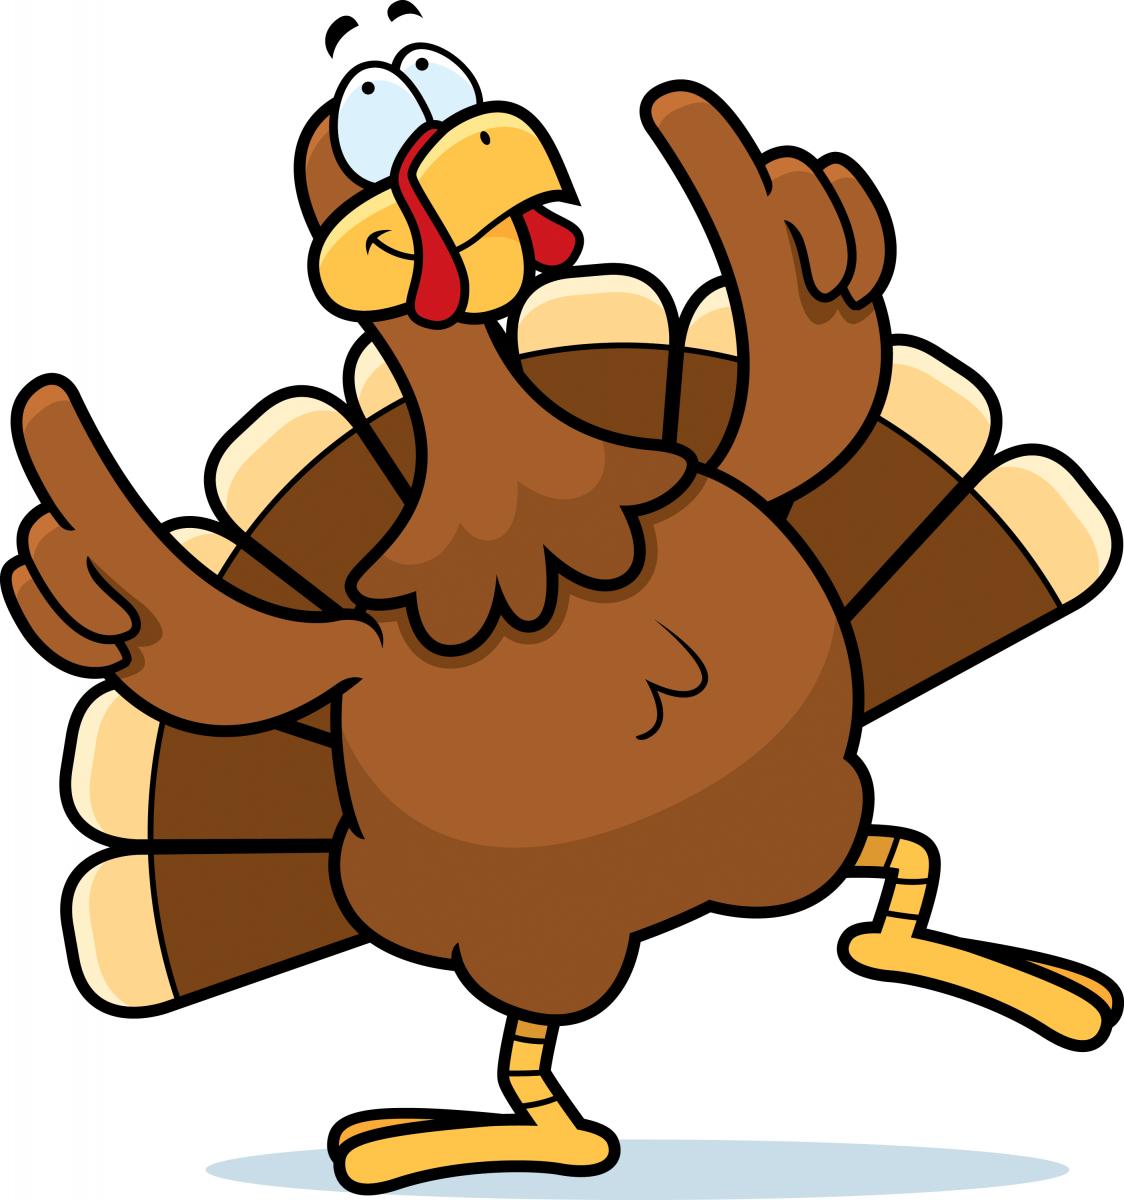 Cute Thanksgiving Turkeys Images & Pictures - Becuo